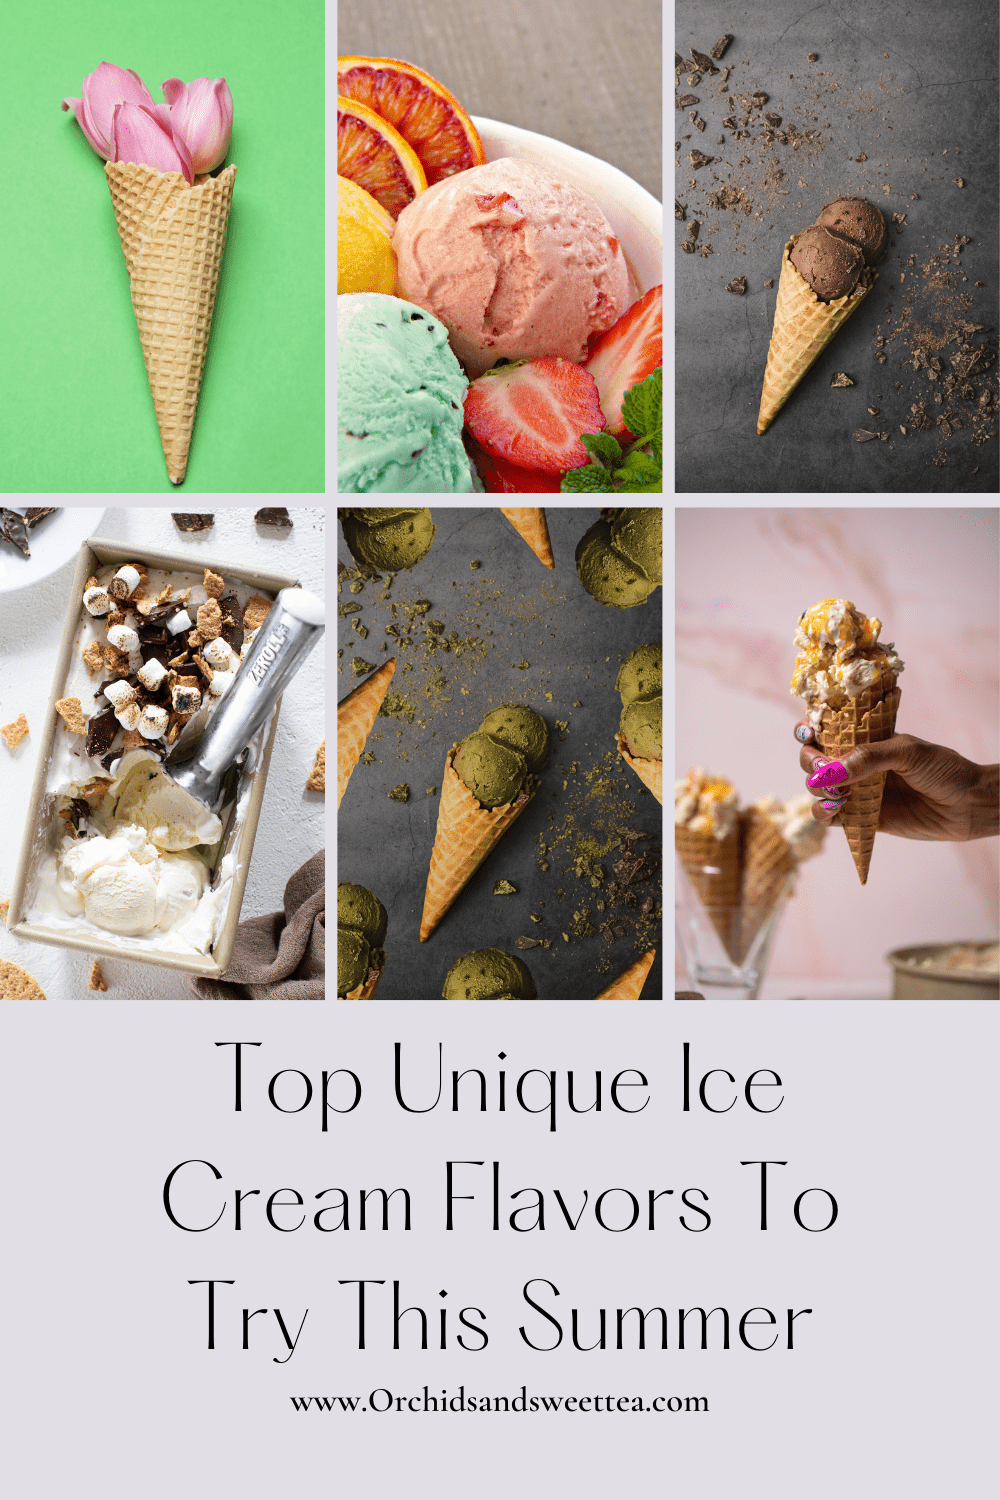 Collage of ice cream with text: Top Unique Ice Cream Flavors To Try This Summer.